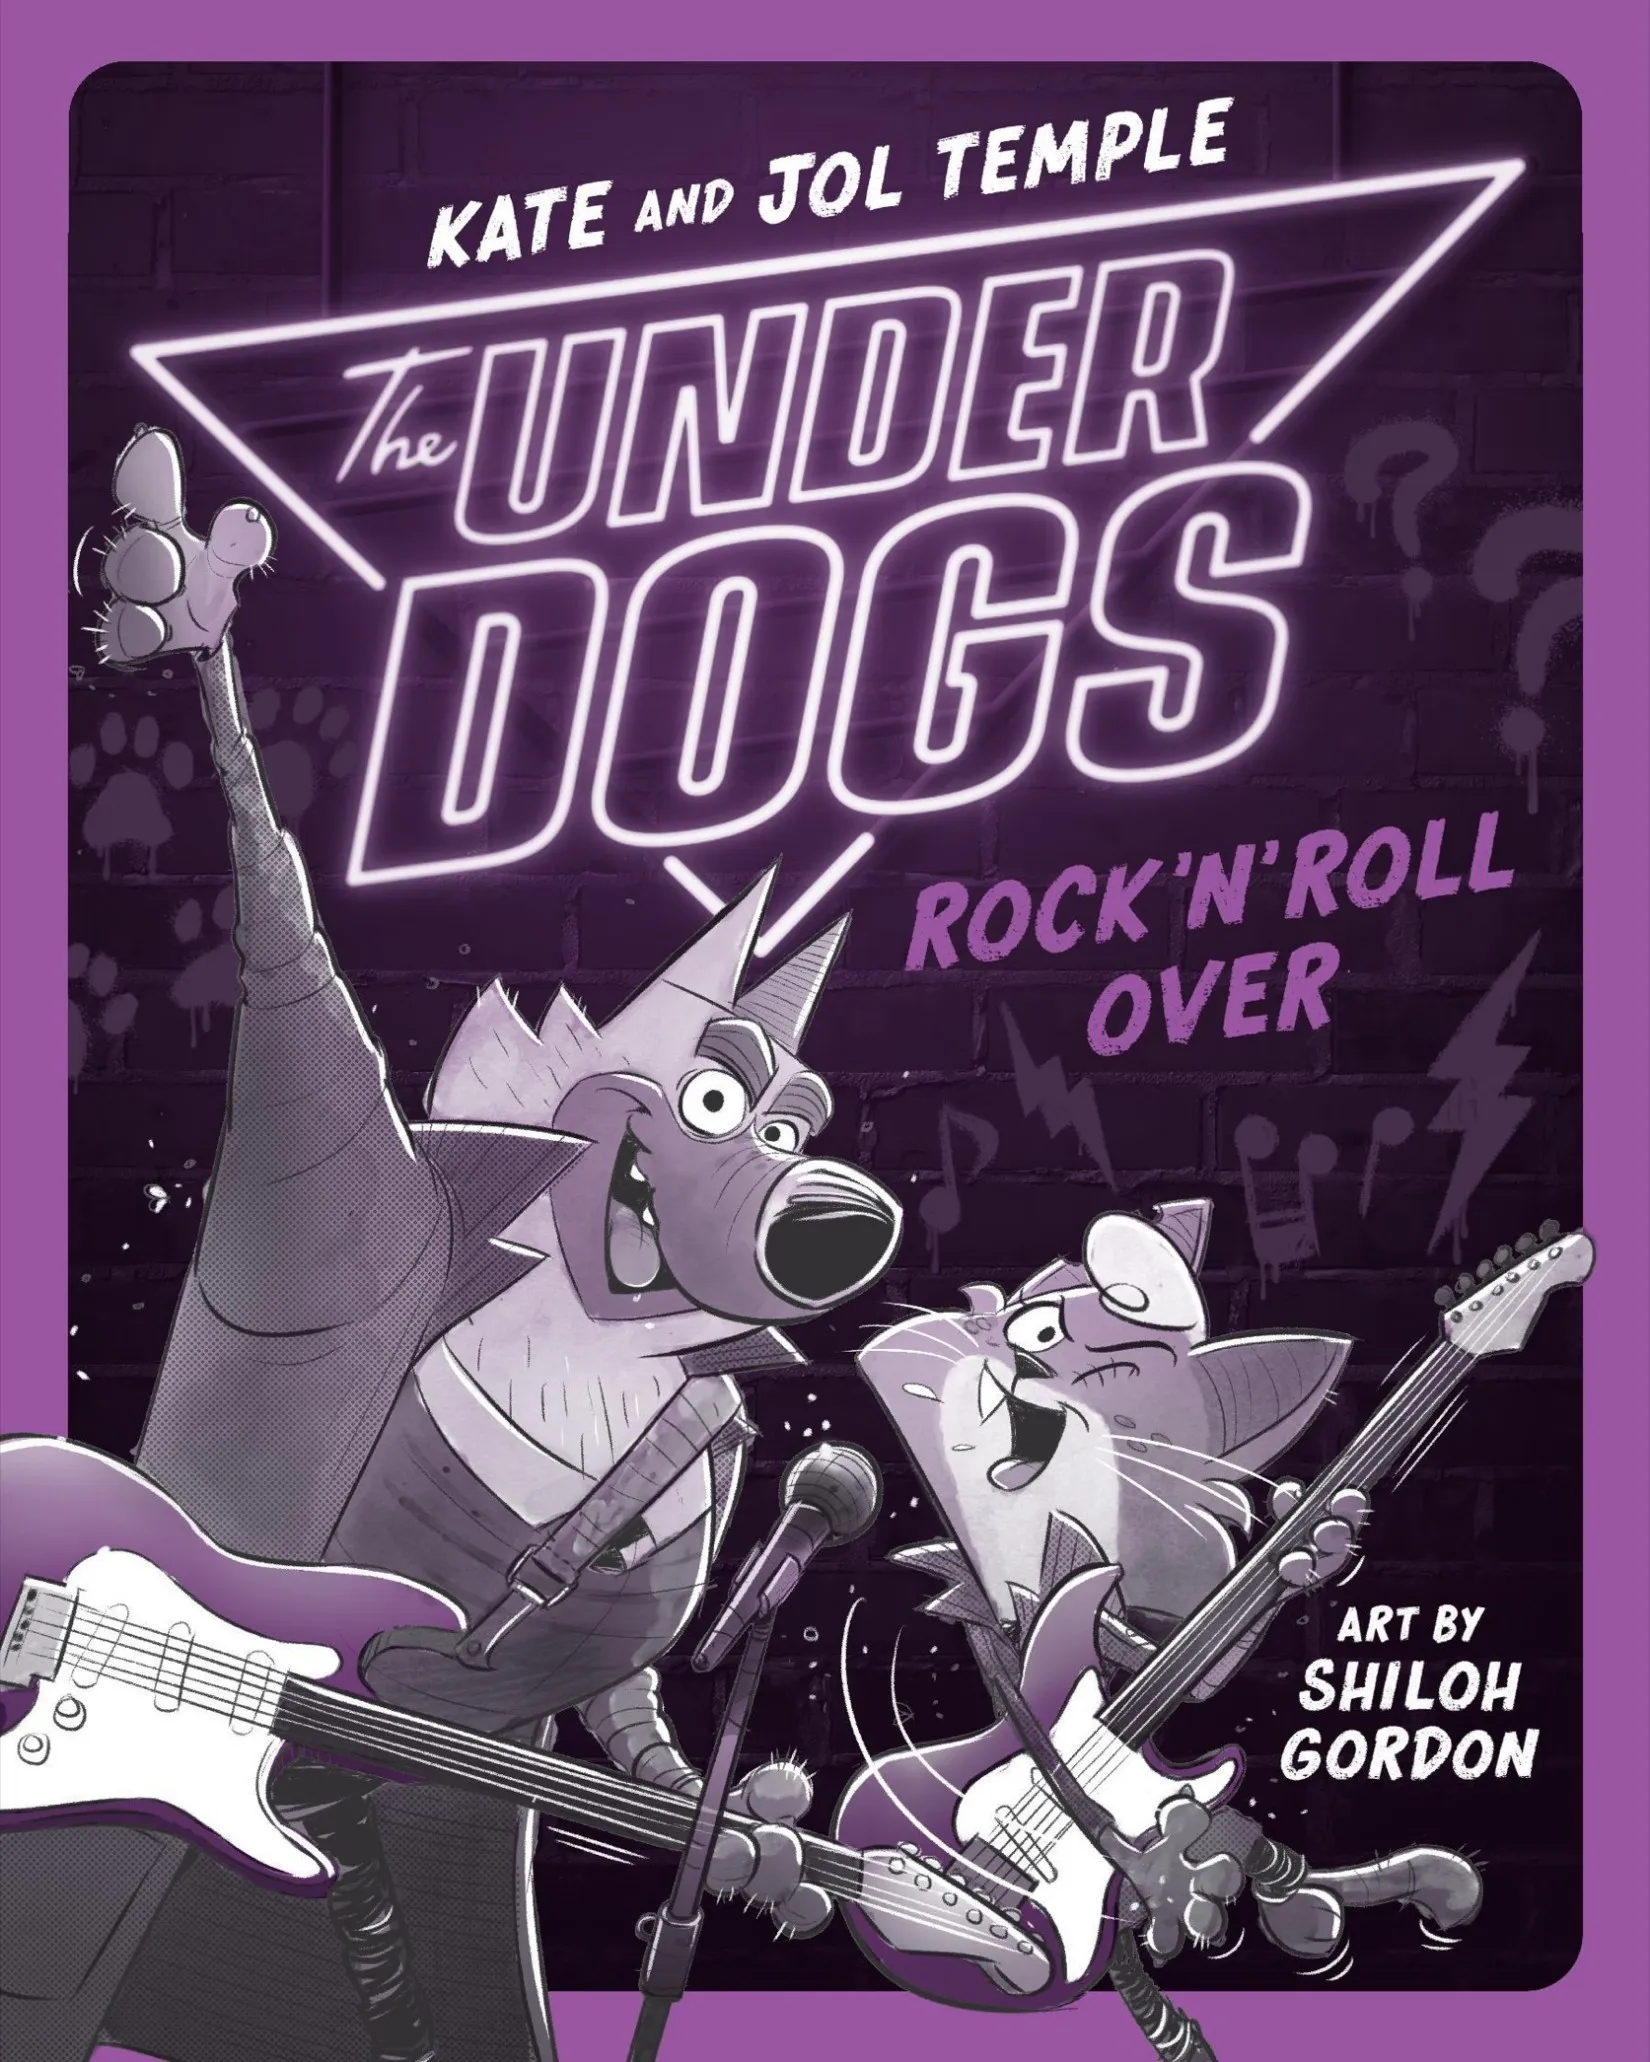 The Underdogs Rock 'n' Roll Over (The Underdogs #4)